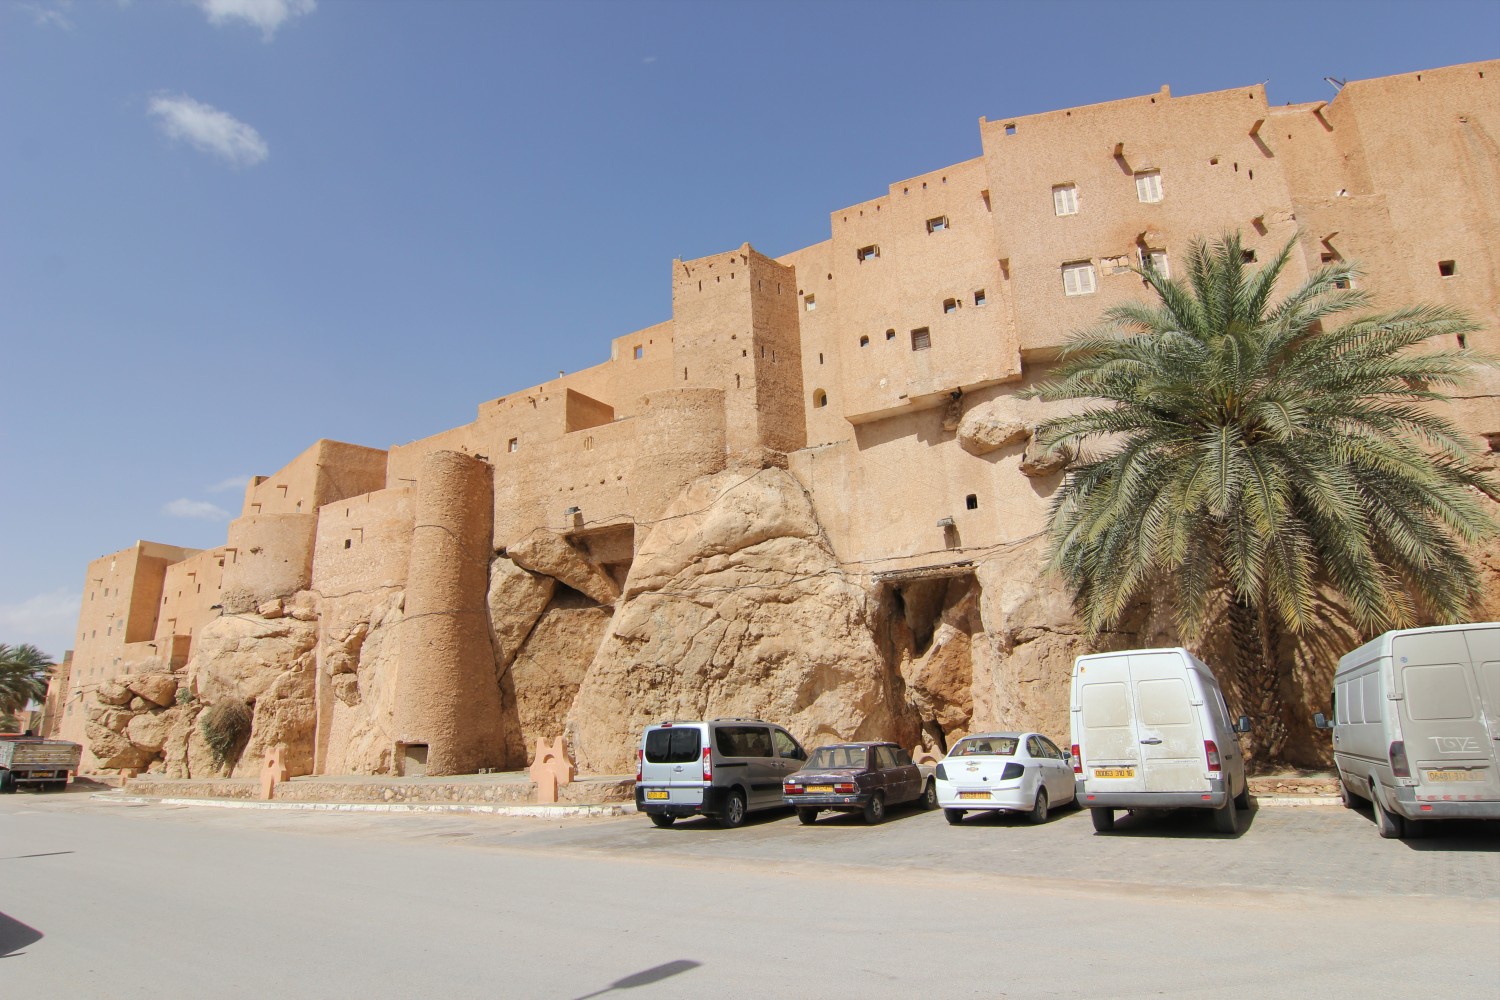 Bou Noura, close view of the eastern ramparts and buildings built on rocks